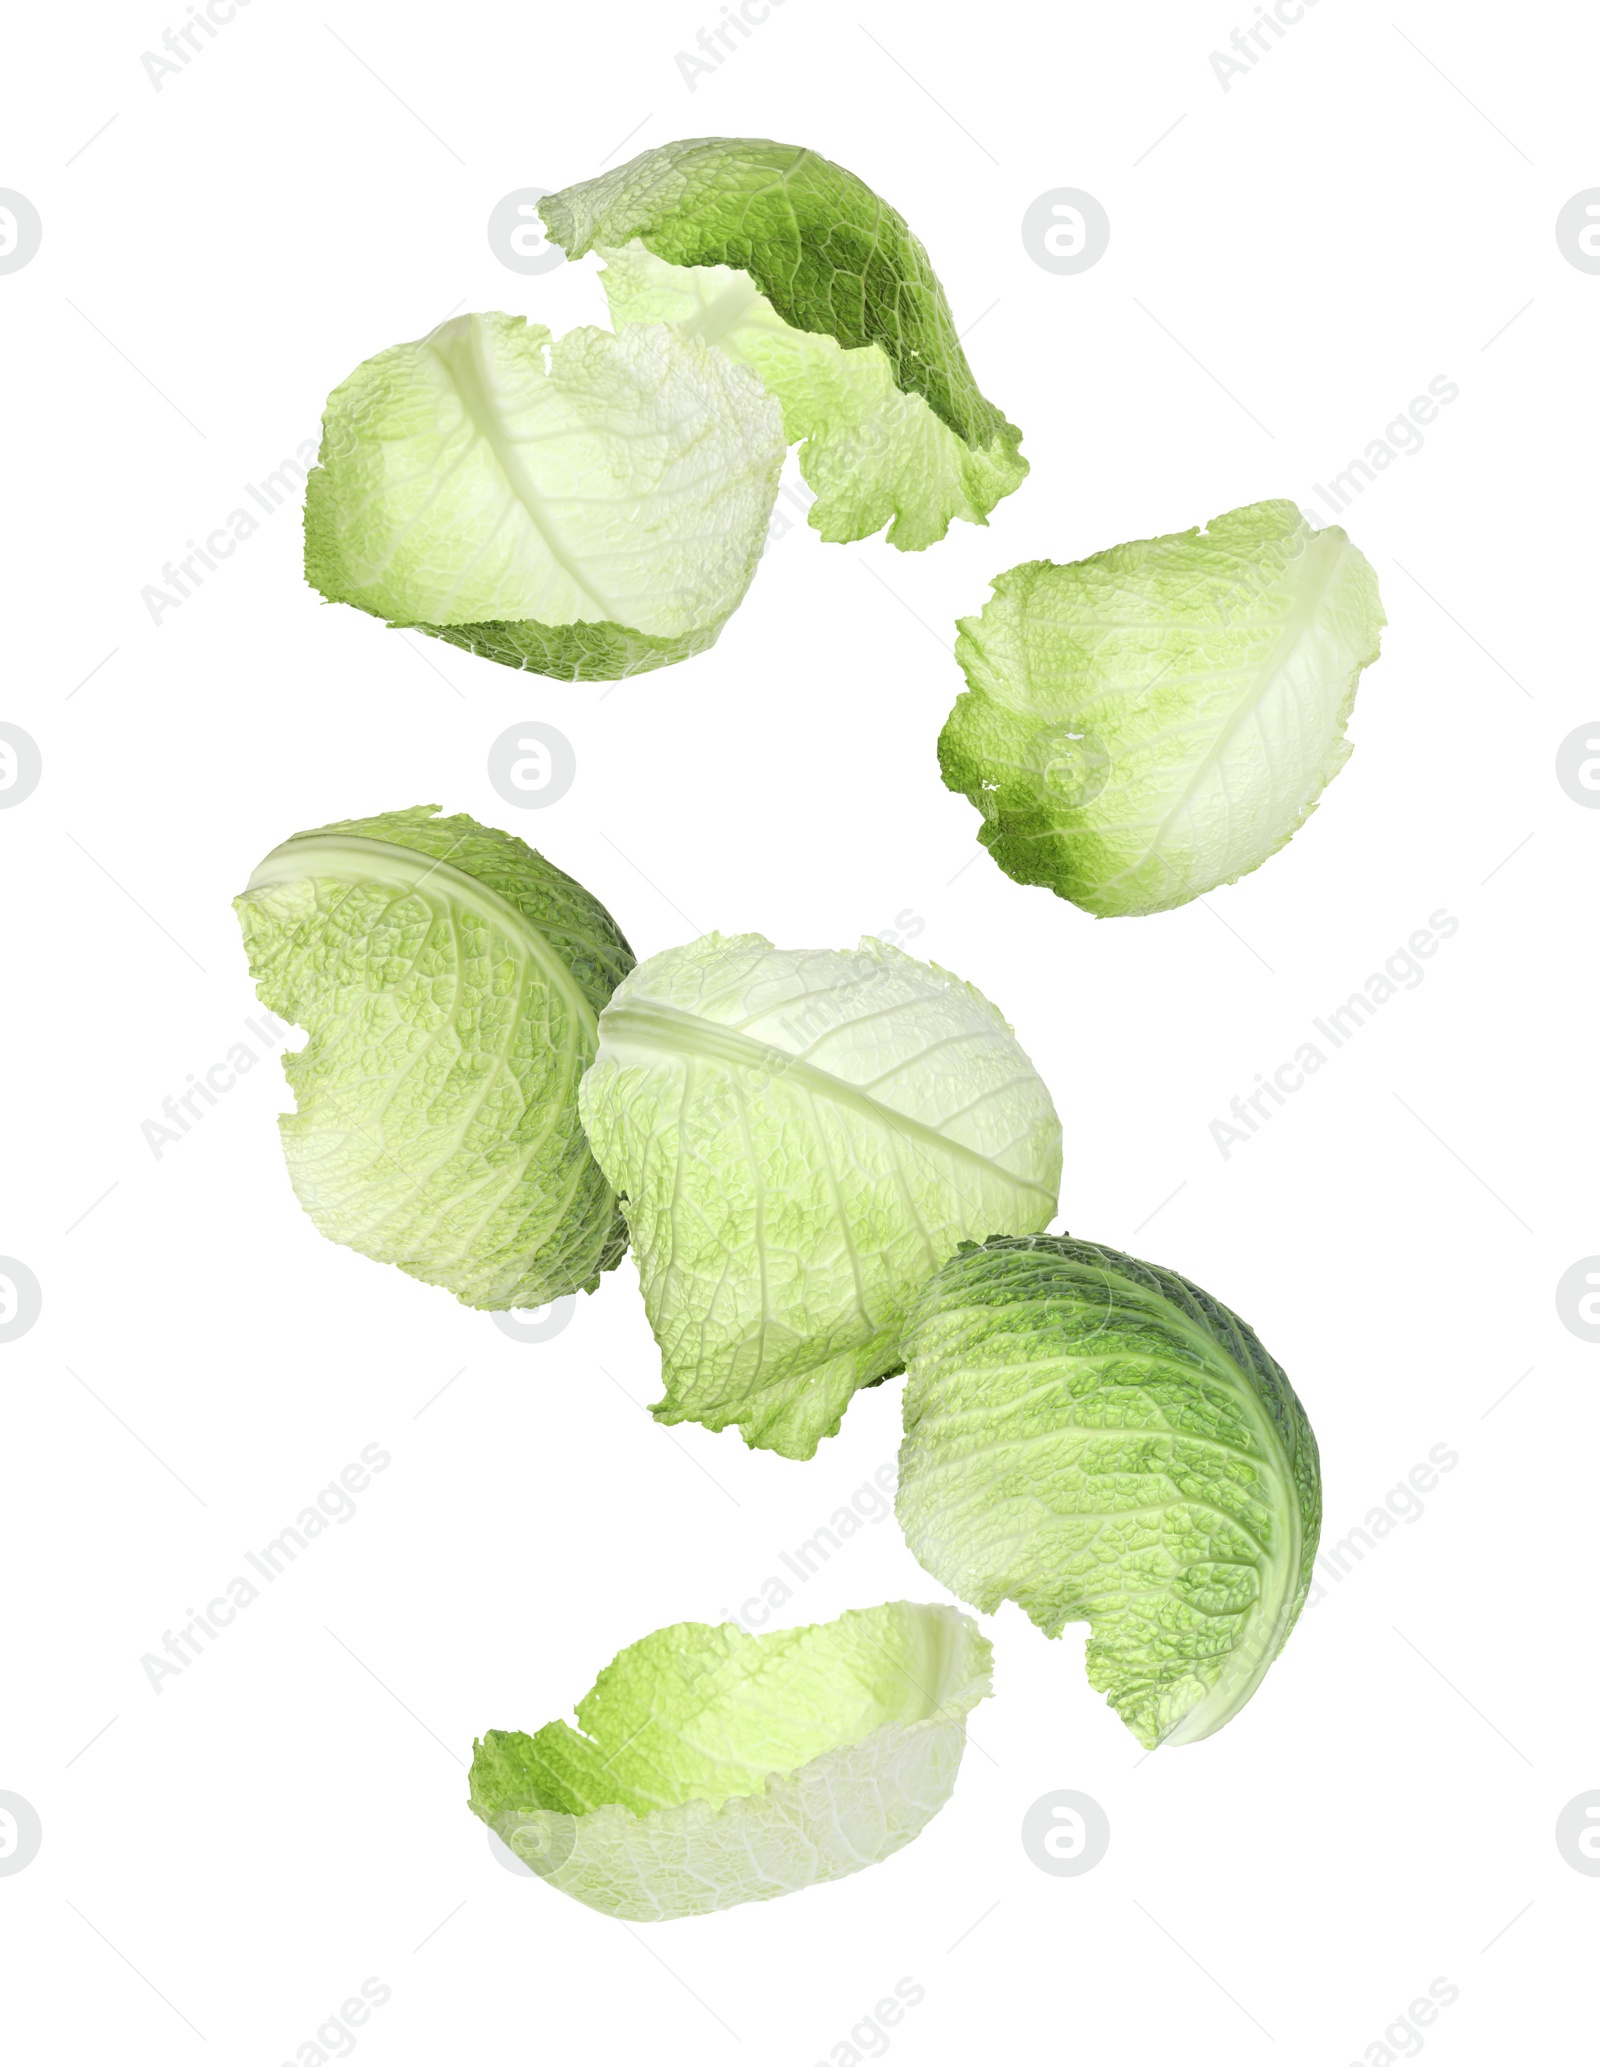 Image of Set with falling fresh leaves of savoy cabbage on white background